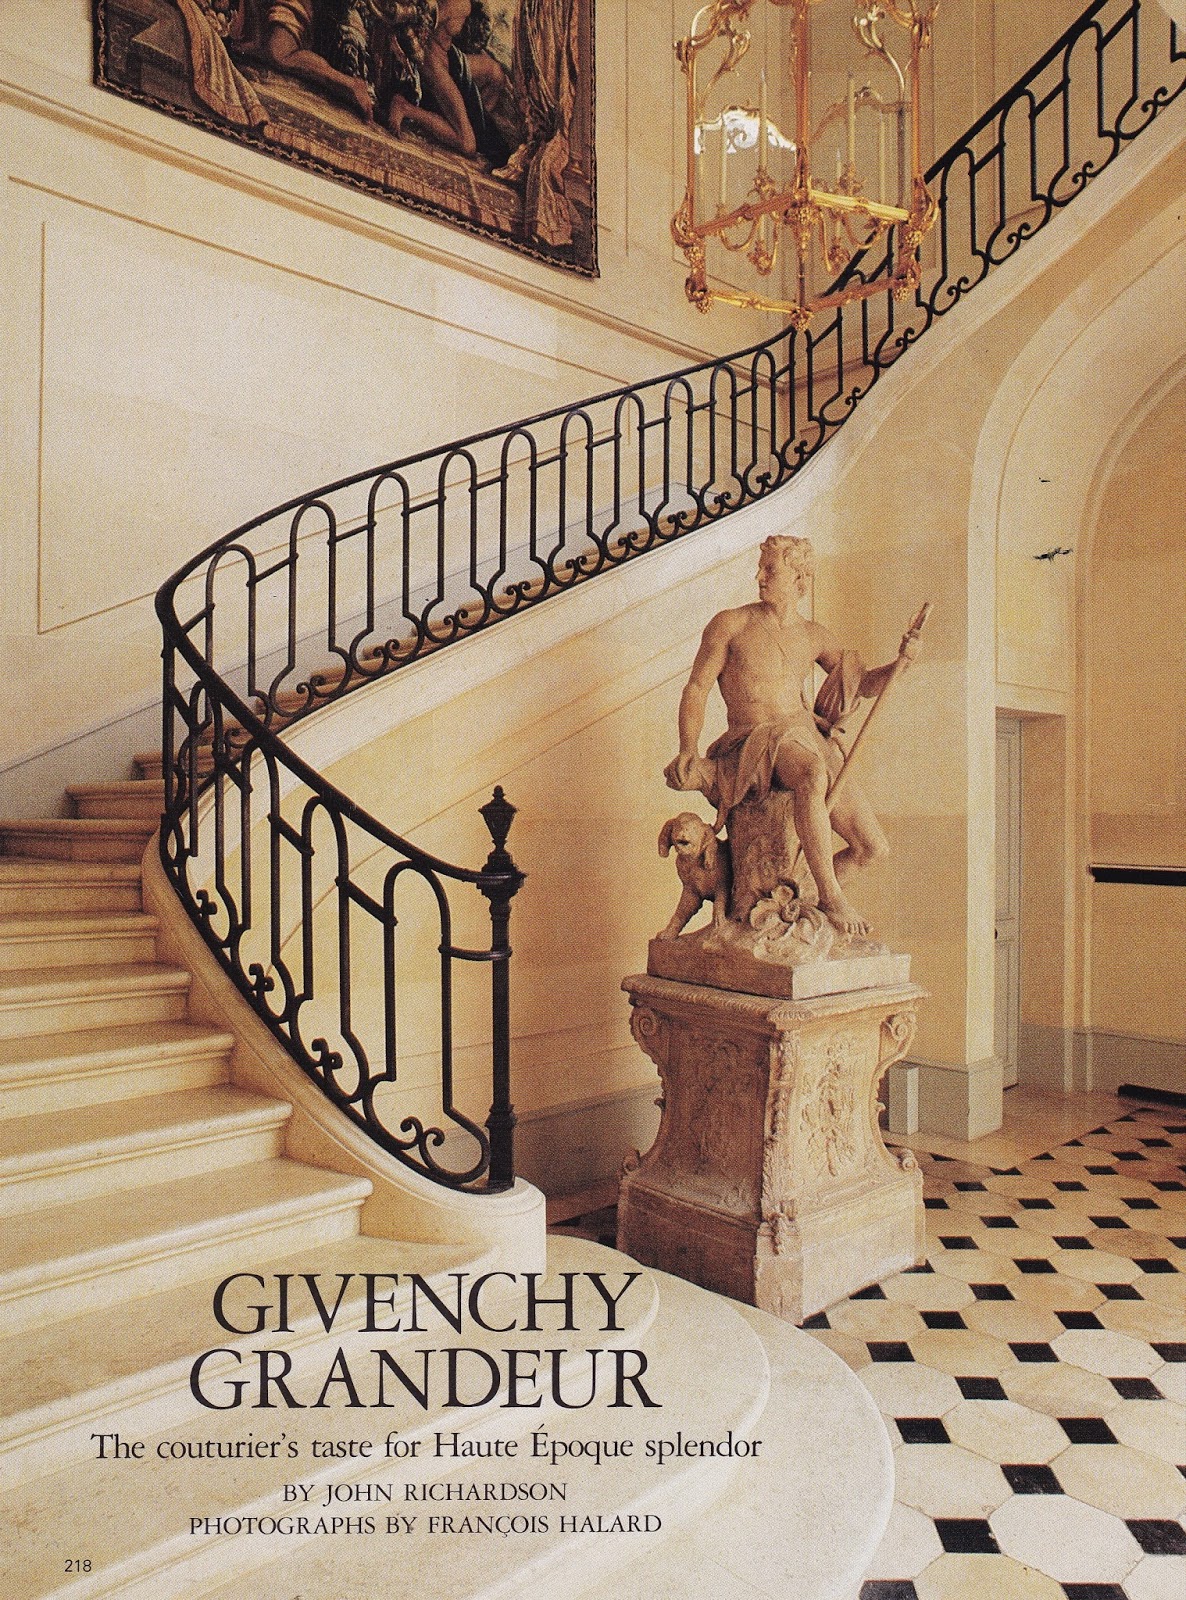 Interiors Redux | The Homes of Hubert de Givenchy in Paris & the South of France